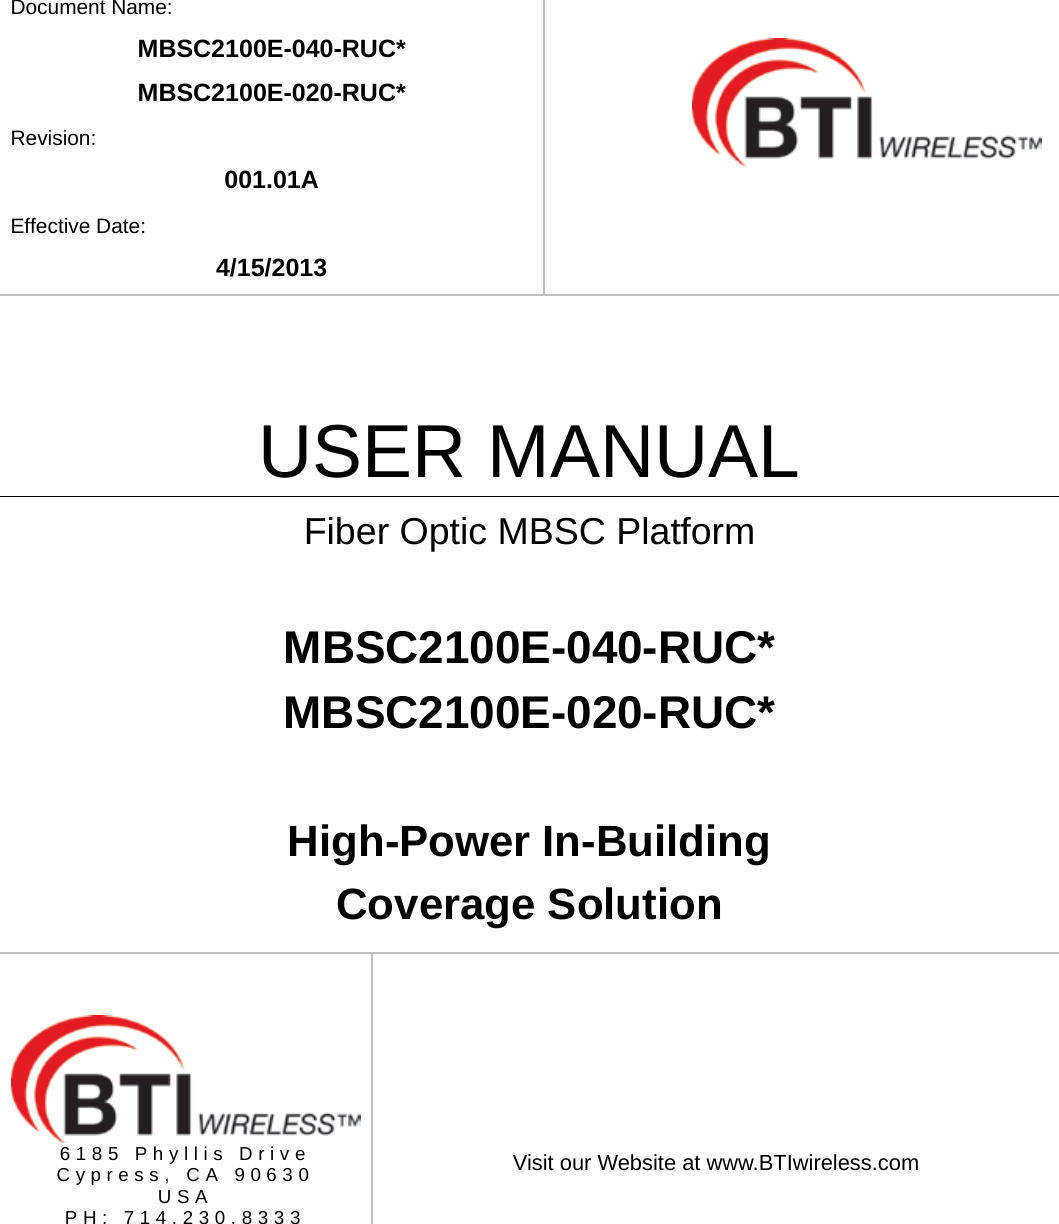    Document Name: MBSC2100E-040-RUC* MBSC2100E-020-RUC* Revision: 001.01A Effective Date: 4/15/2013    USER MANUAL Fiber Optic MBSC Platform  MBSC2100E-040-RUC* MBSC2100E-020-RUC*  High-Power In-Building Coverage Solution       6185 Phyllis Drive Cypress, CA 90630 USA PH: 714.230.8333   Visit our Website at www.BTIwireless.com 